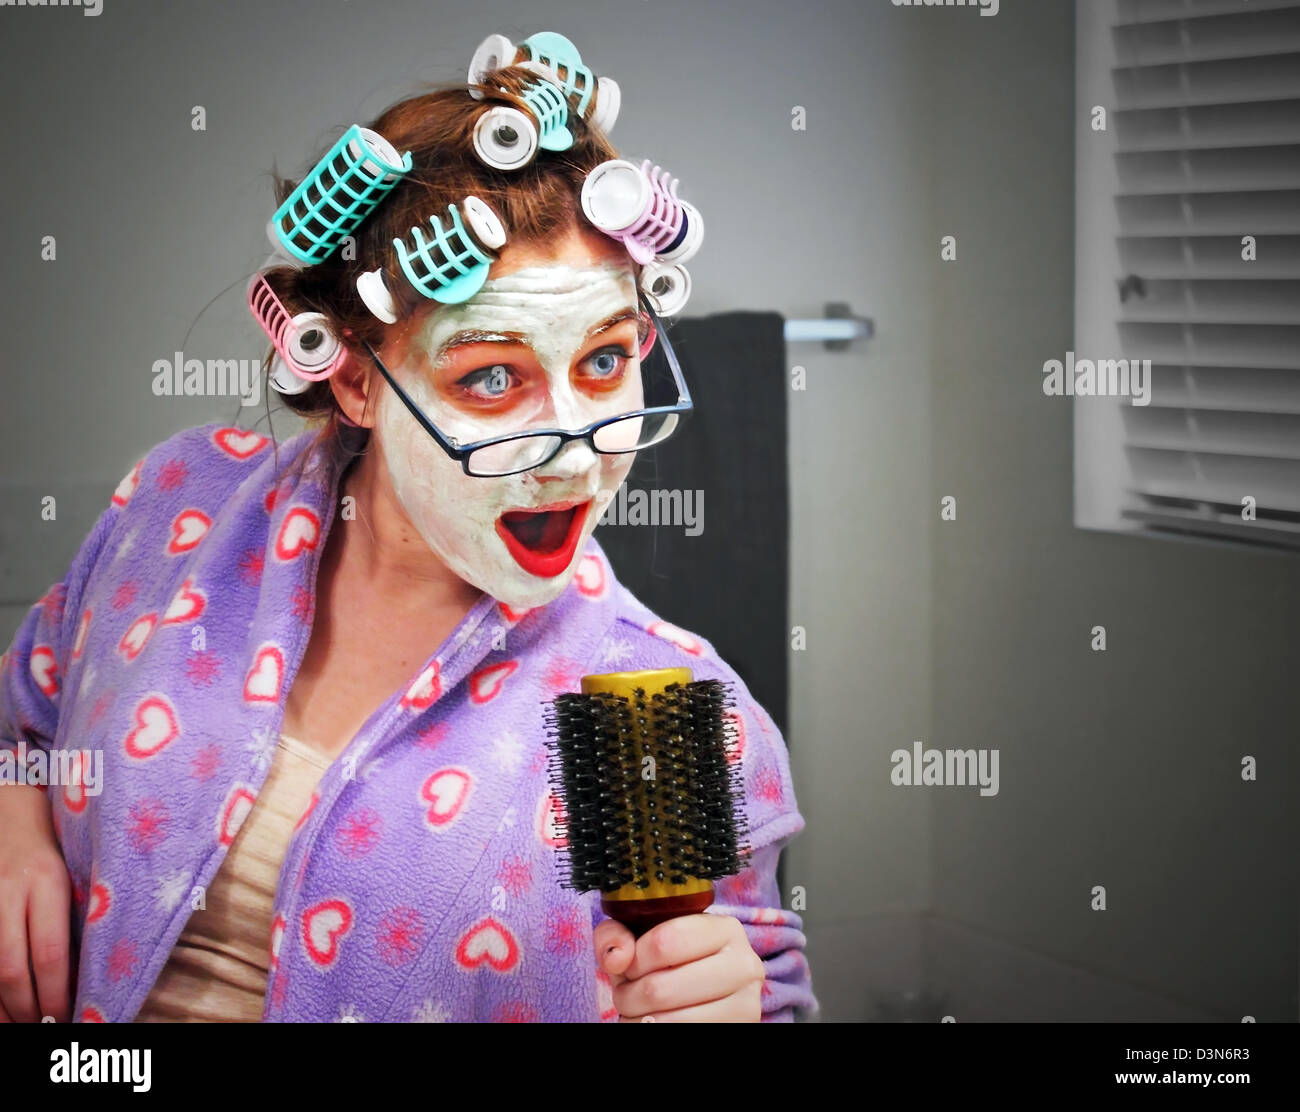 A young woman with glasses, curlers and a facial masque sings into a hair brush while preparing to head out on the town. Stock Photo